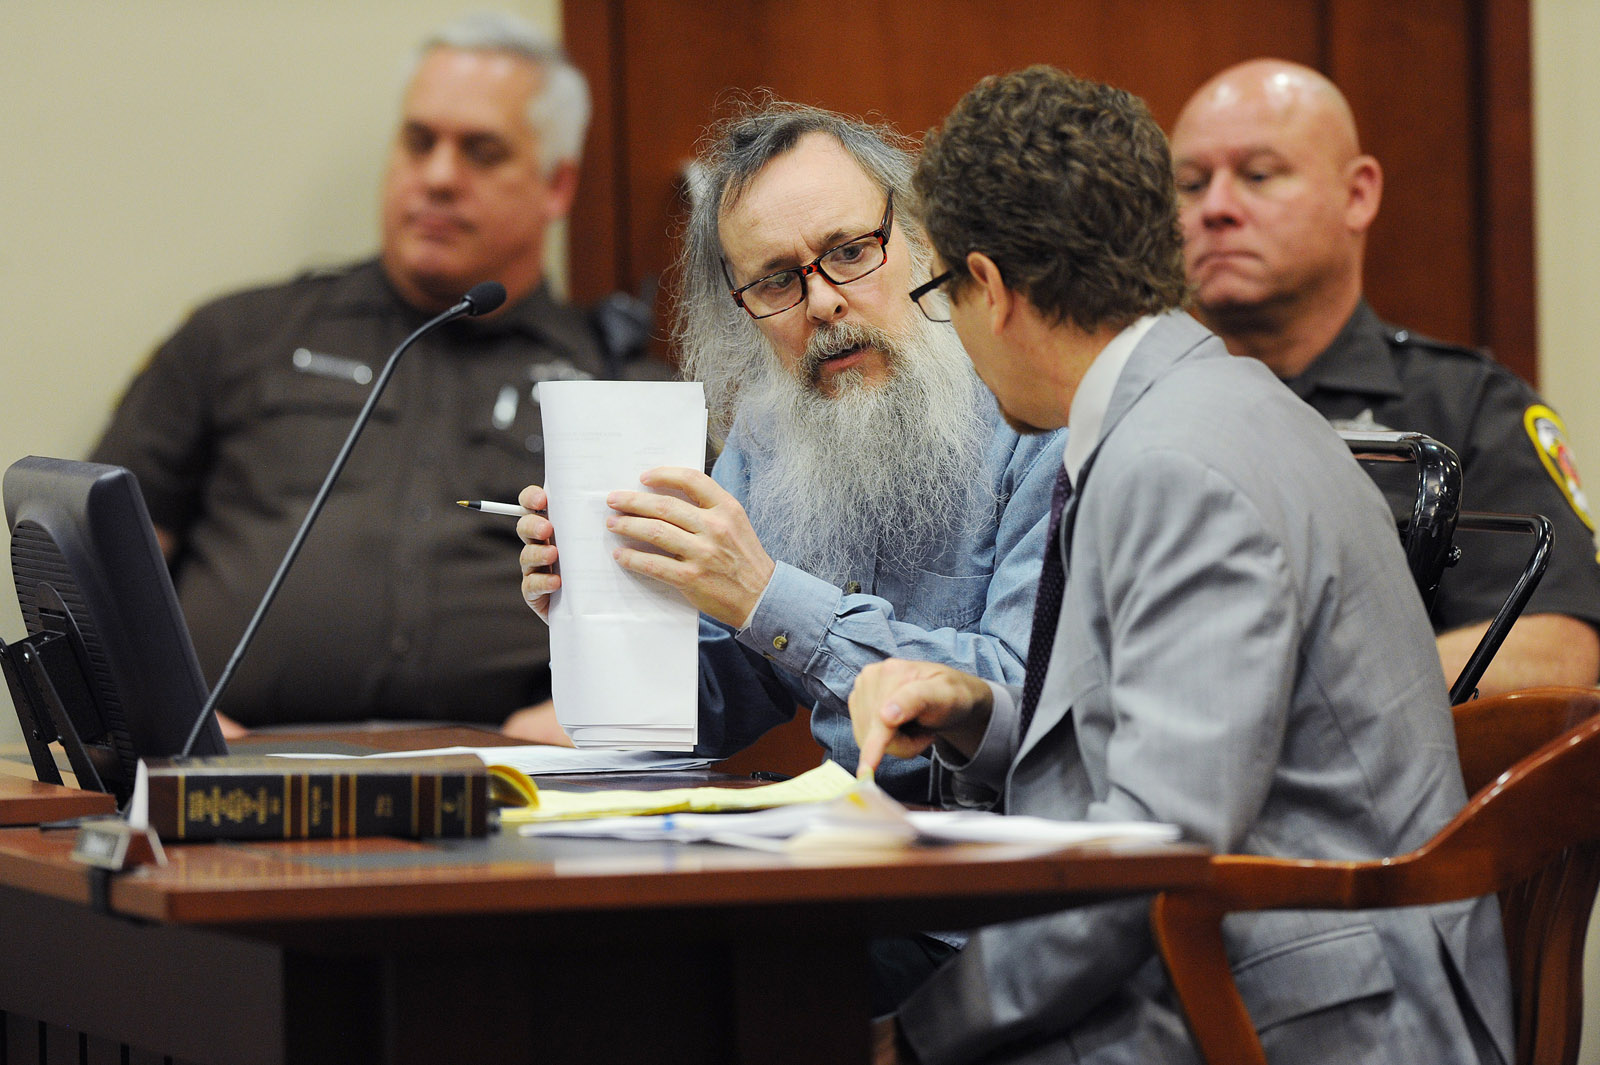 Charles Severance, center, talks to defense attorney, Joe King, right center, as he appears in Fairfax County Circuit Court on Thursday October 01, 2015 in Fairfax, Va. Severance is accused of three murders over the course of a decade in Alexandria, Va. (Pool Photo by Matt McClain/ The Washington Post)